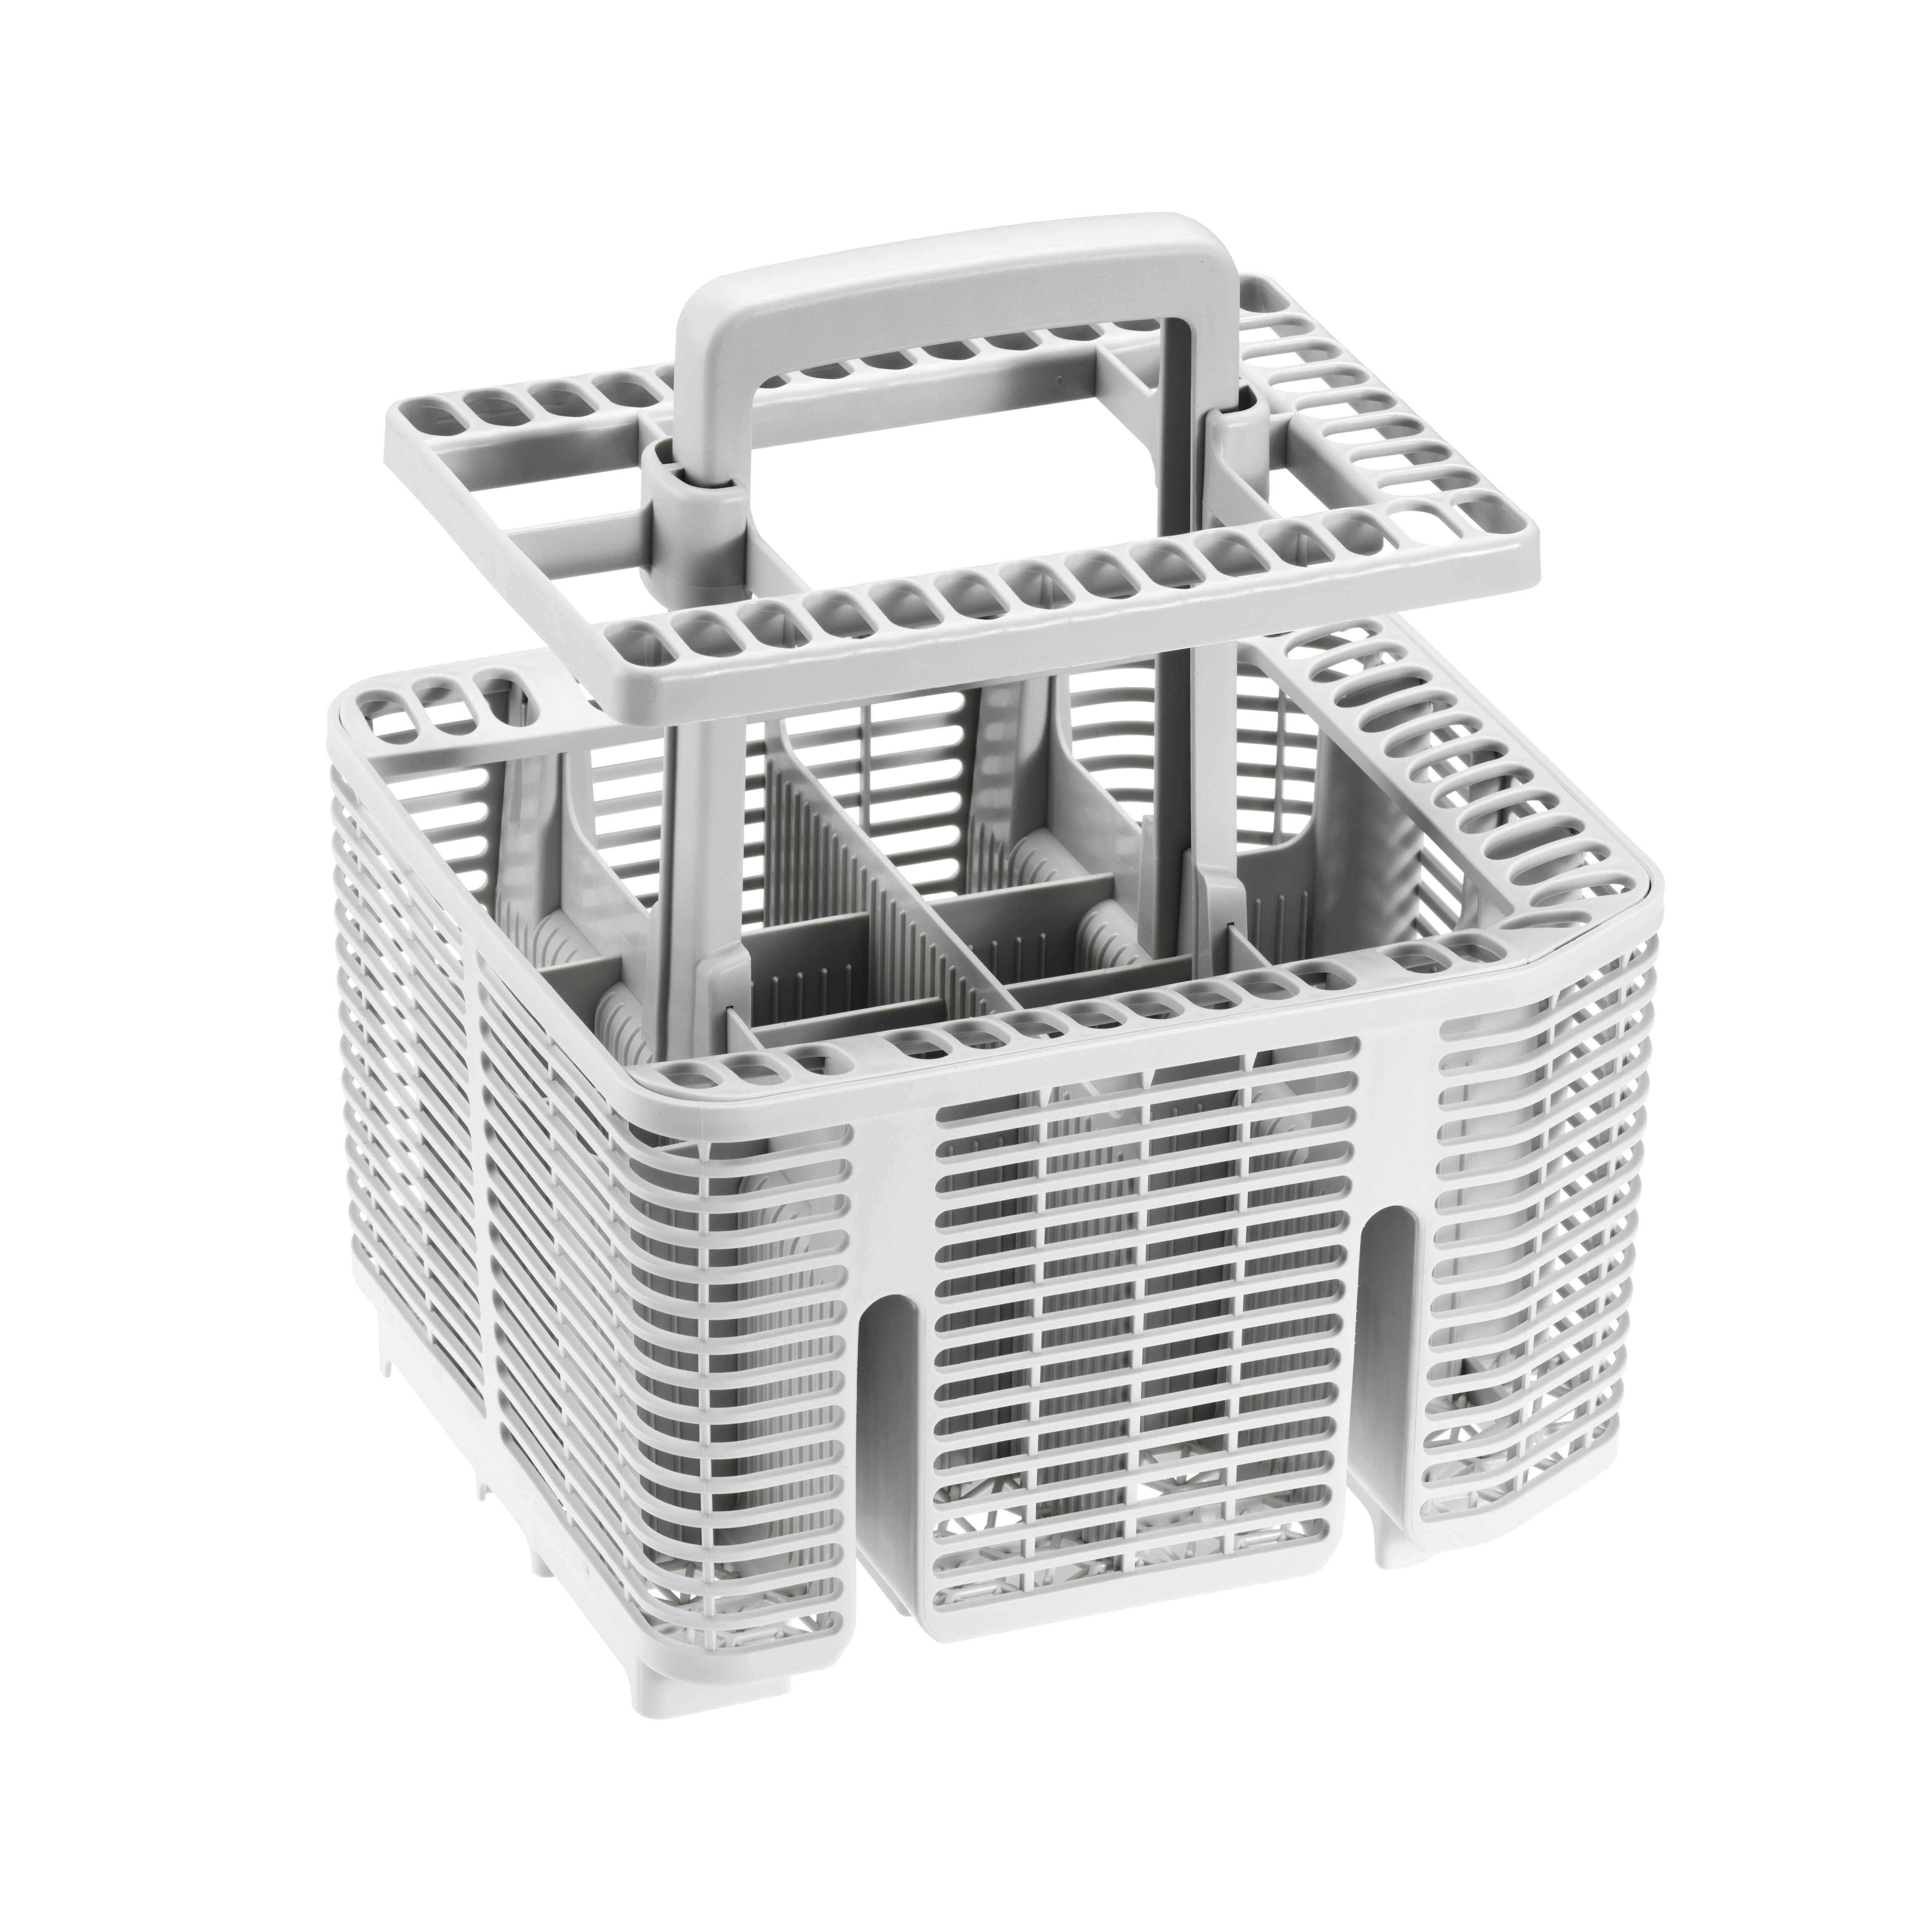 Quality replacement Cutlery Basket for MIELE NEFF SIEMENS dishwasher 